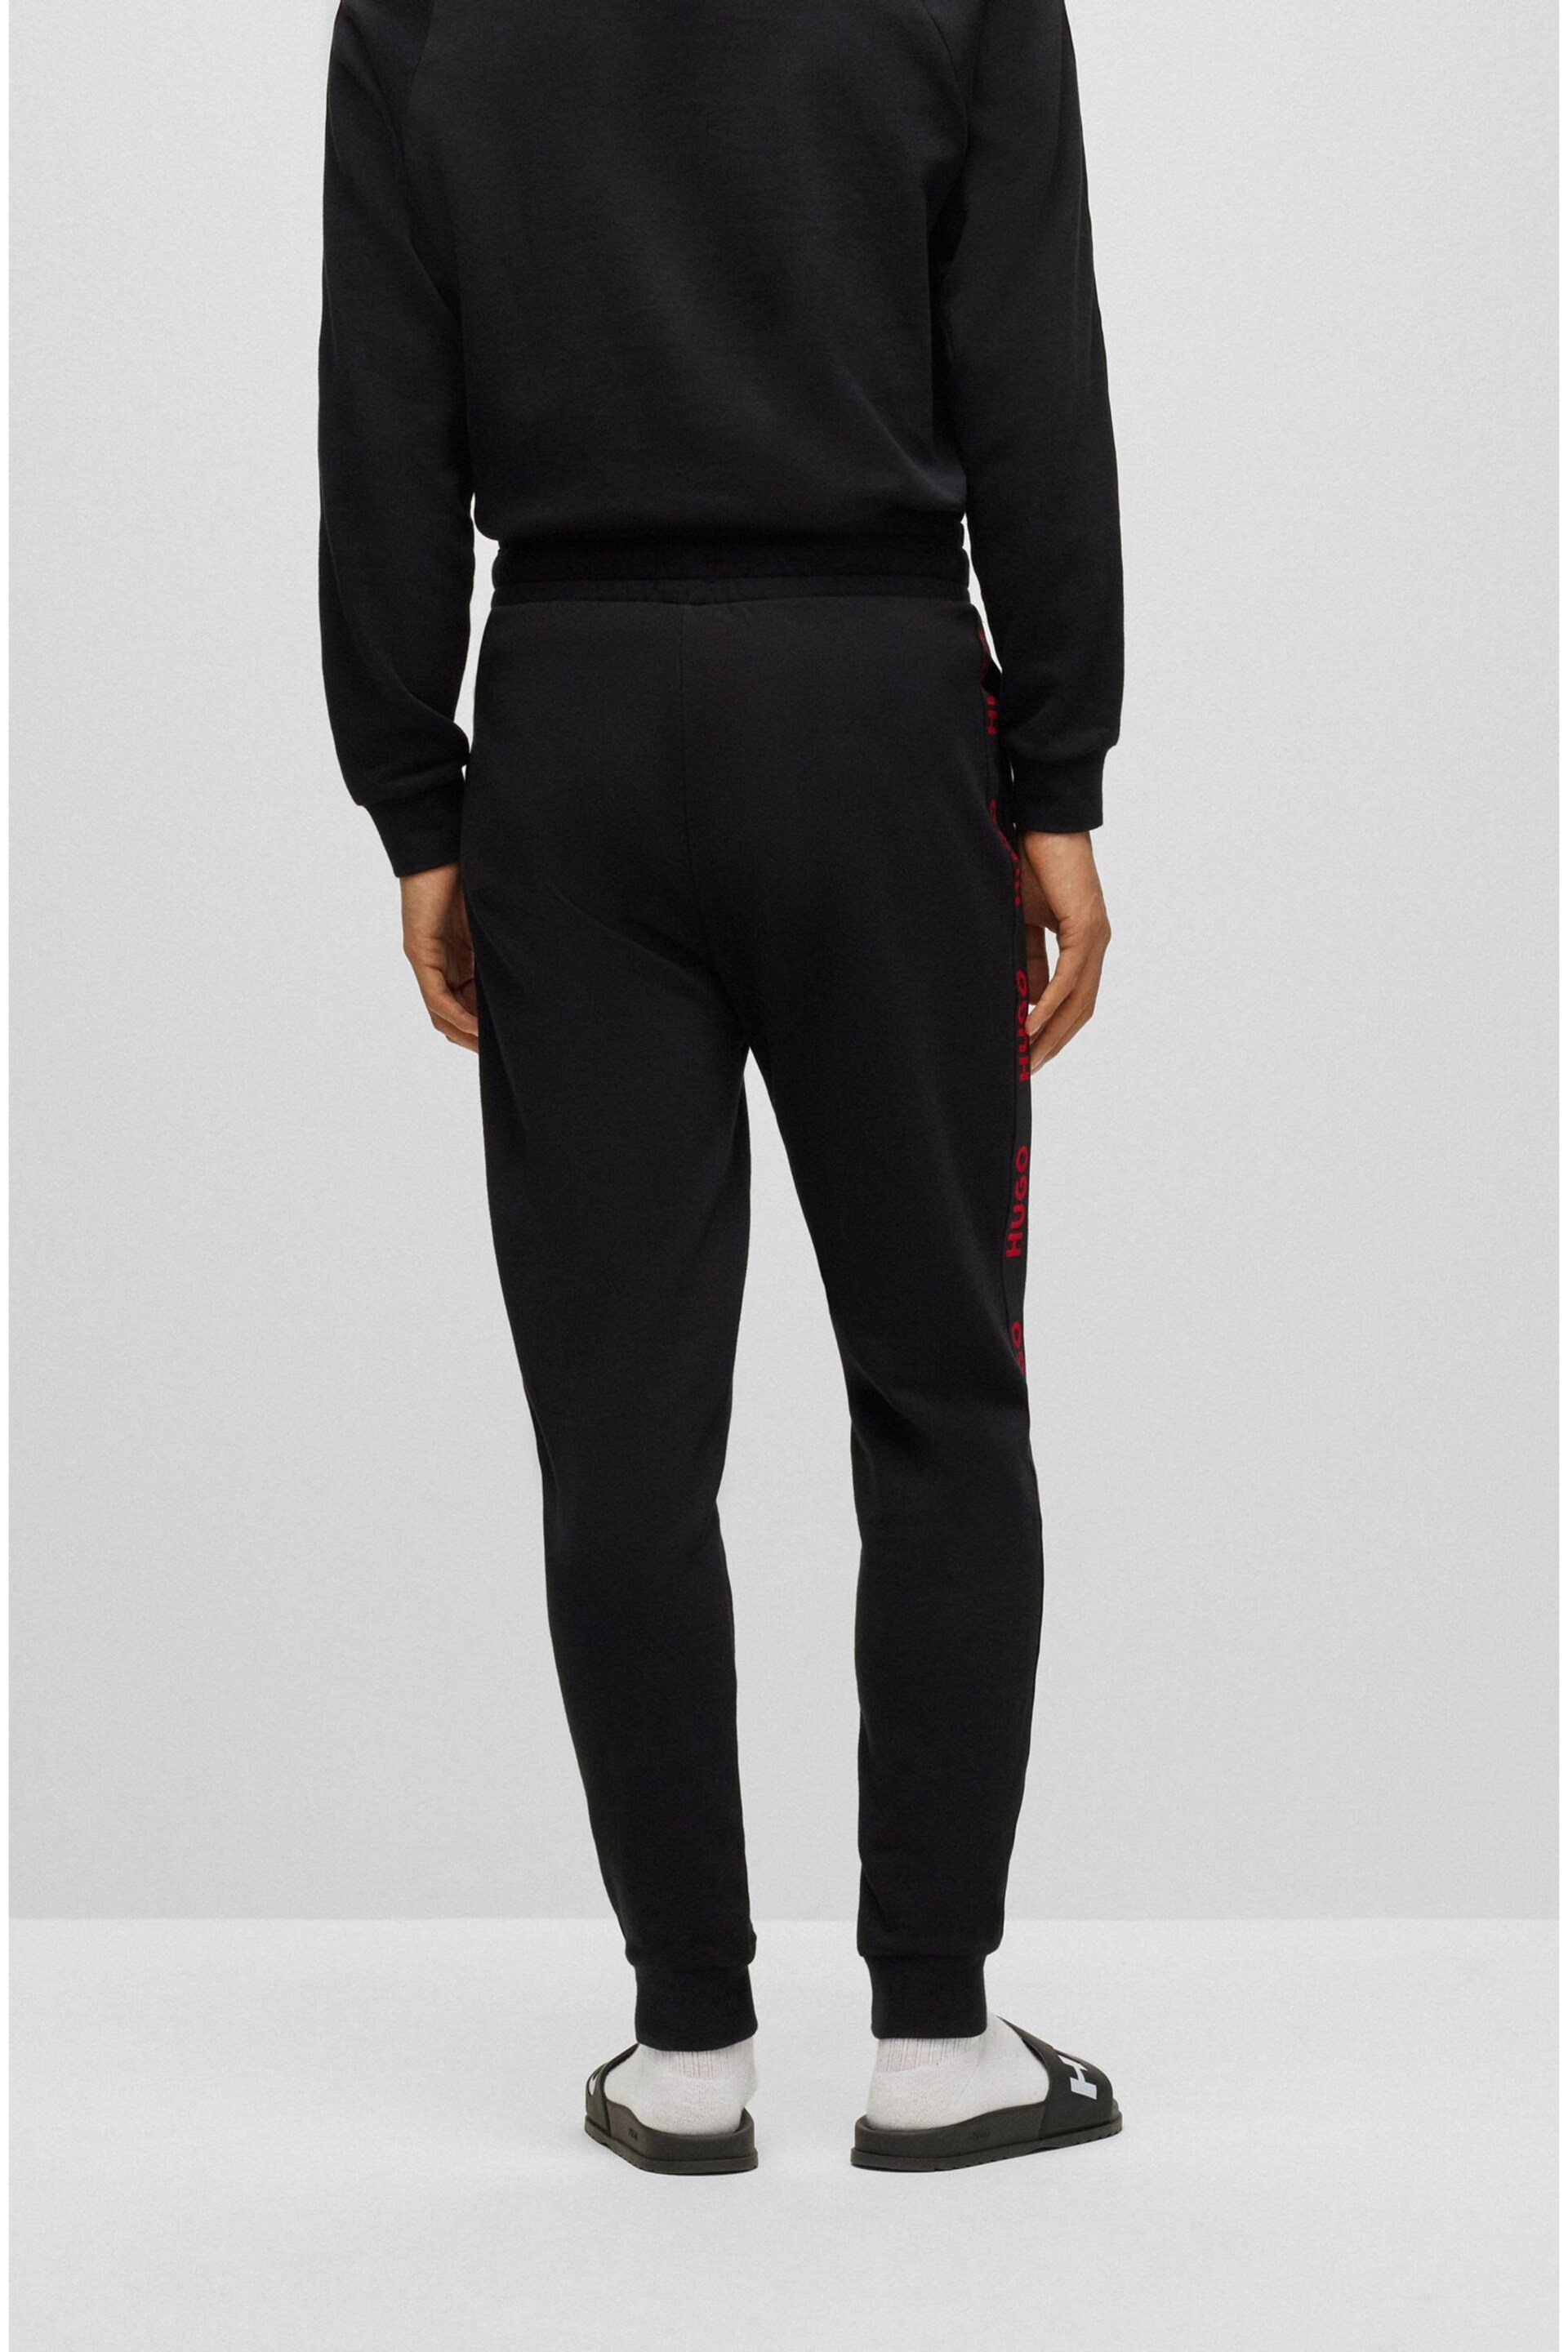 HUGO Embroidered Tape Logo Tracksuit Joggers - Image 3 of 6